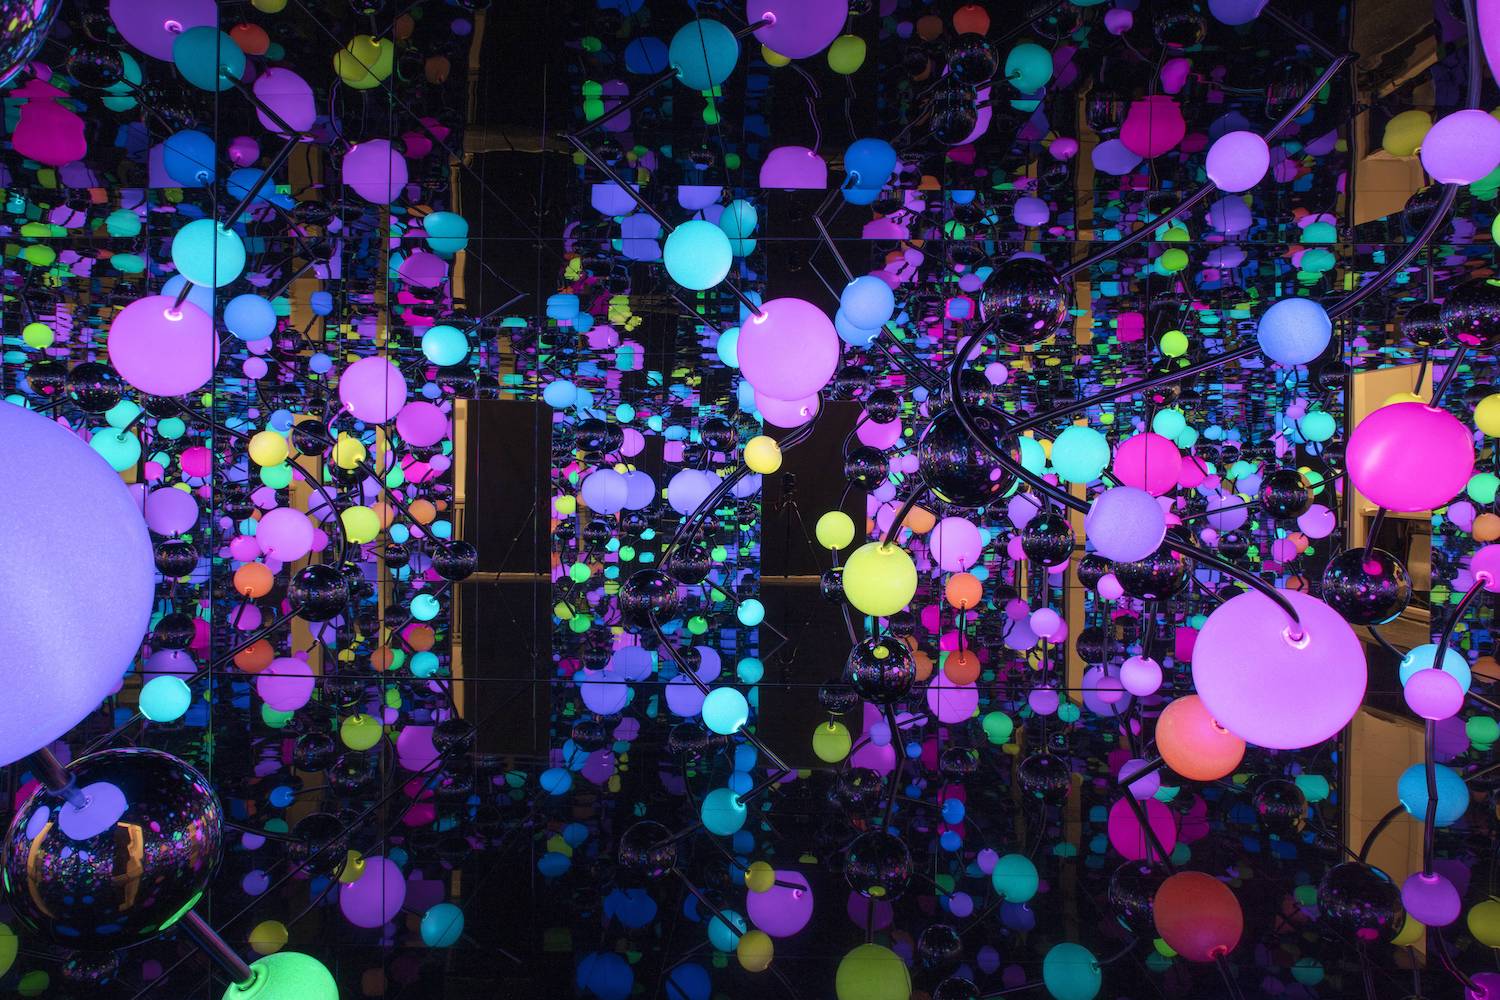 We saw the Yayoi Kusama robot at Louis Vuitton and it's terrifying